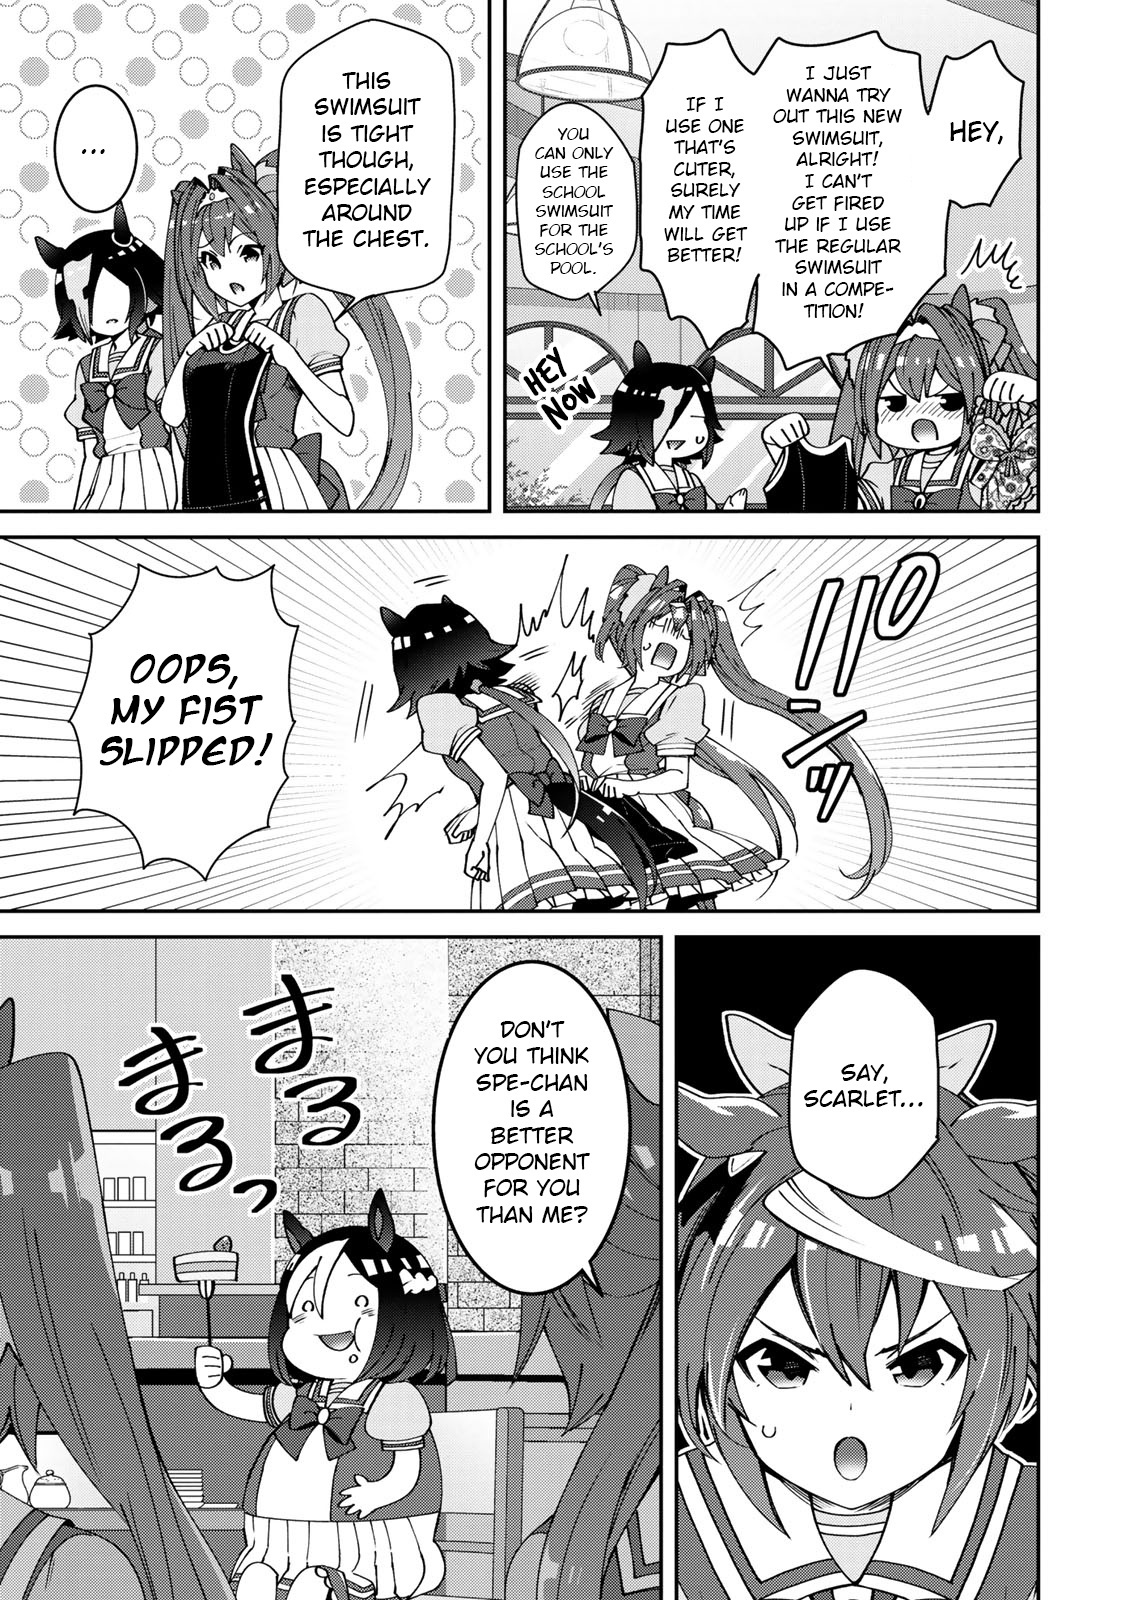 Starting Gate! Uma Musume Pretty Derby Vol.3 Chapter 19.6: Daiwa Scarlet Special - Picture 3